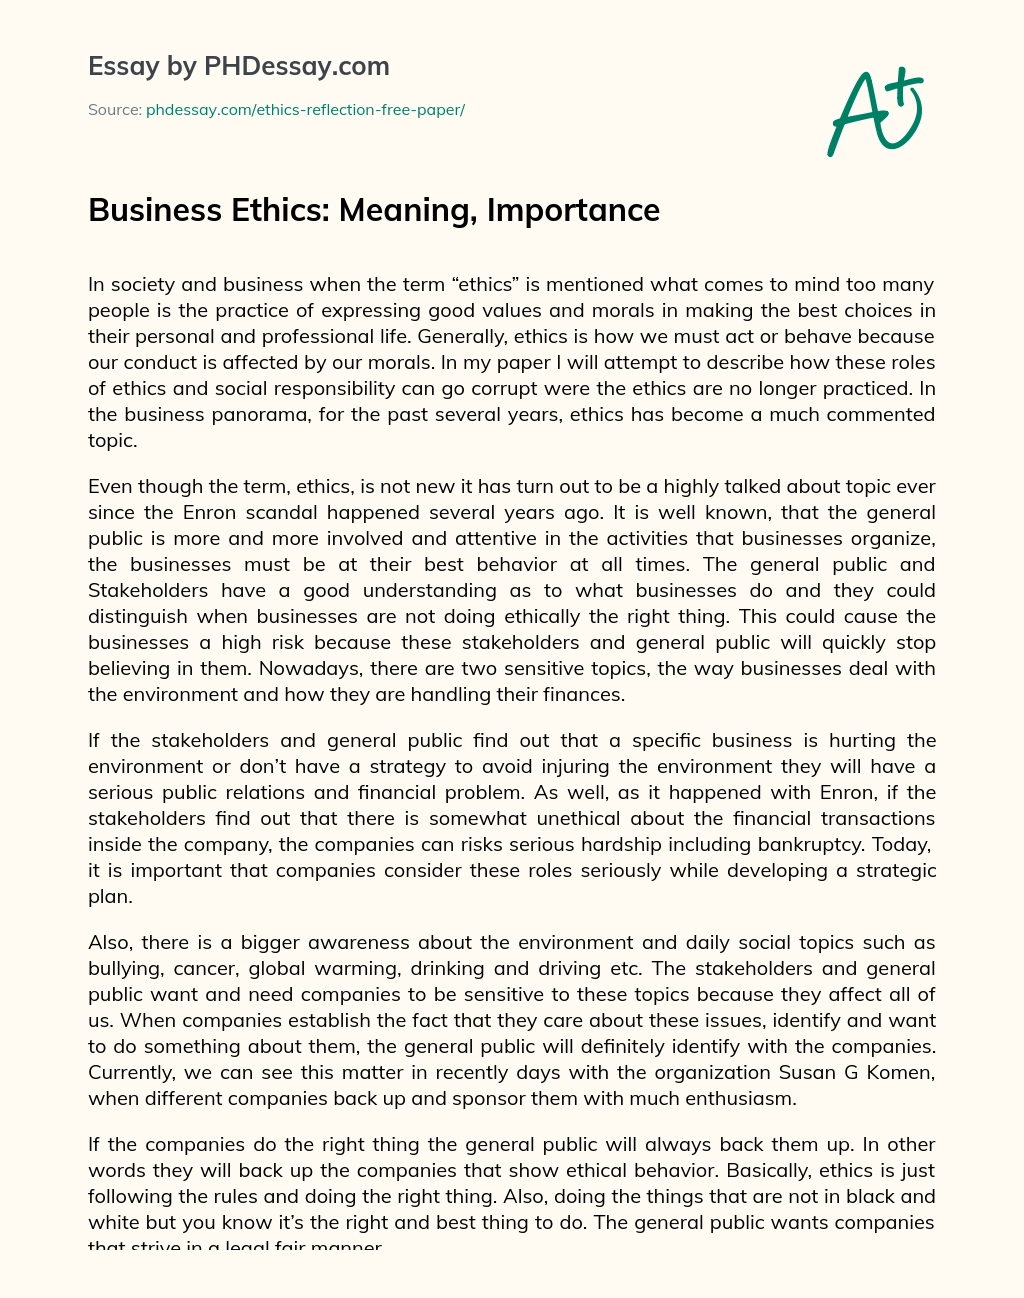 Business Ethics: Meaning, Importance essay